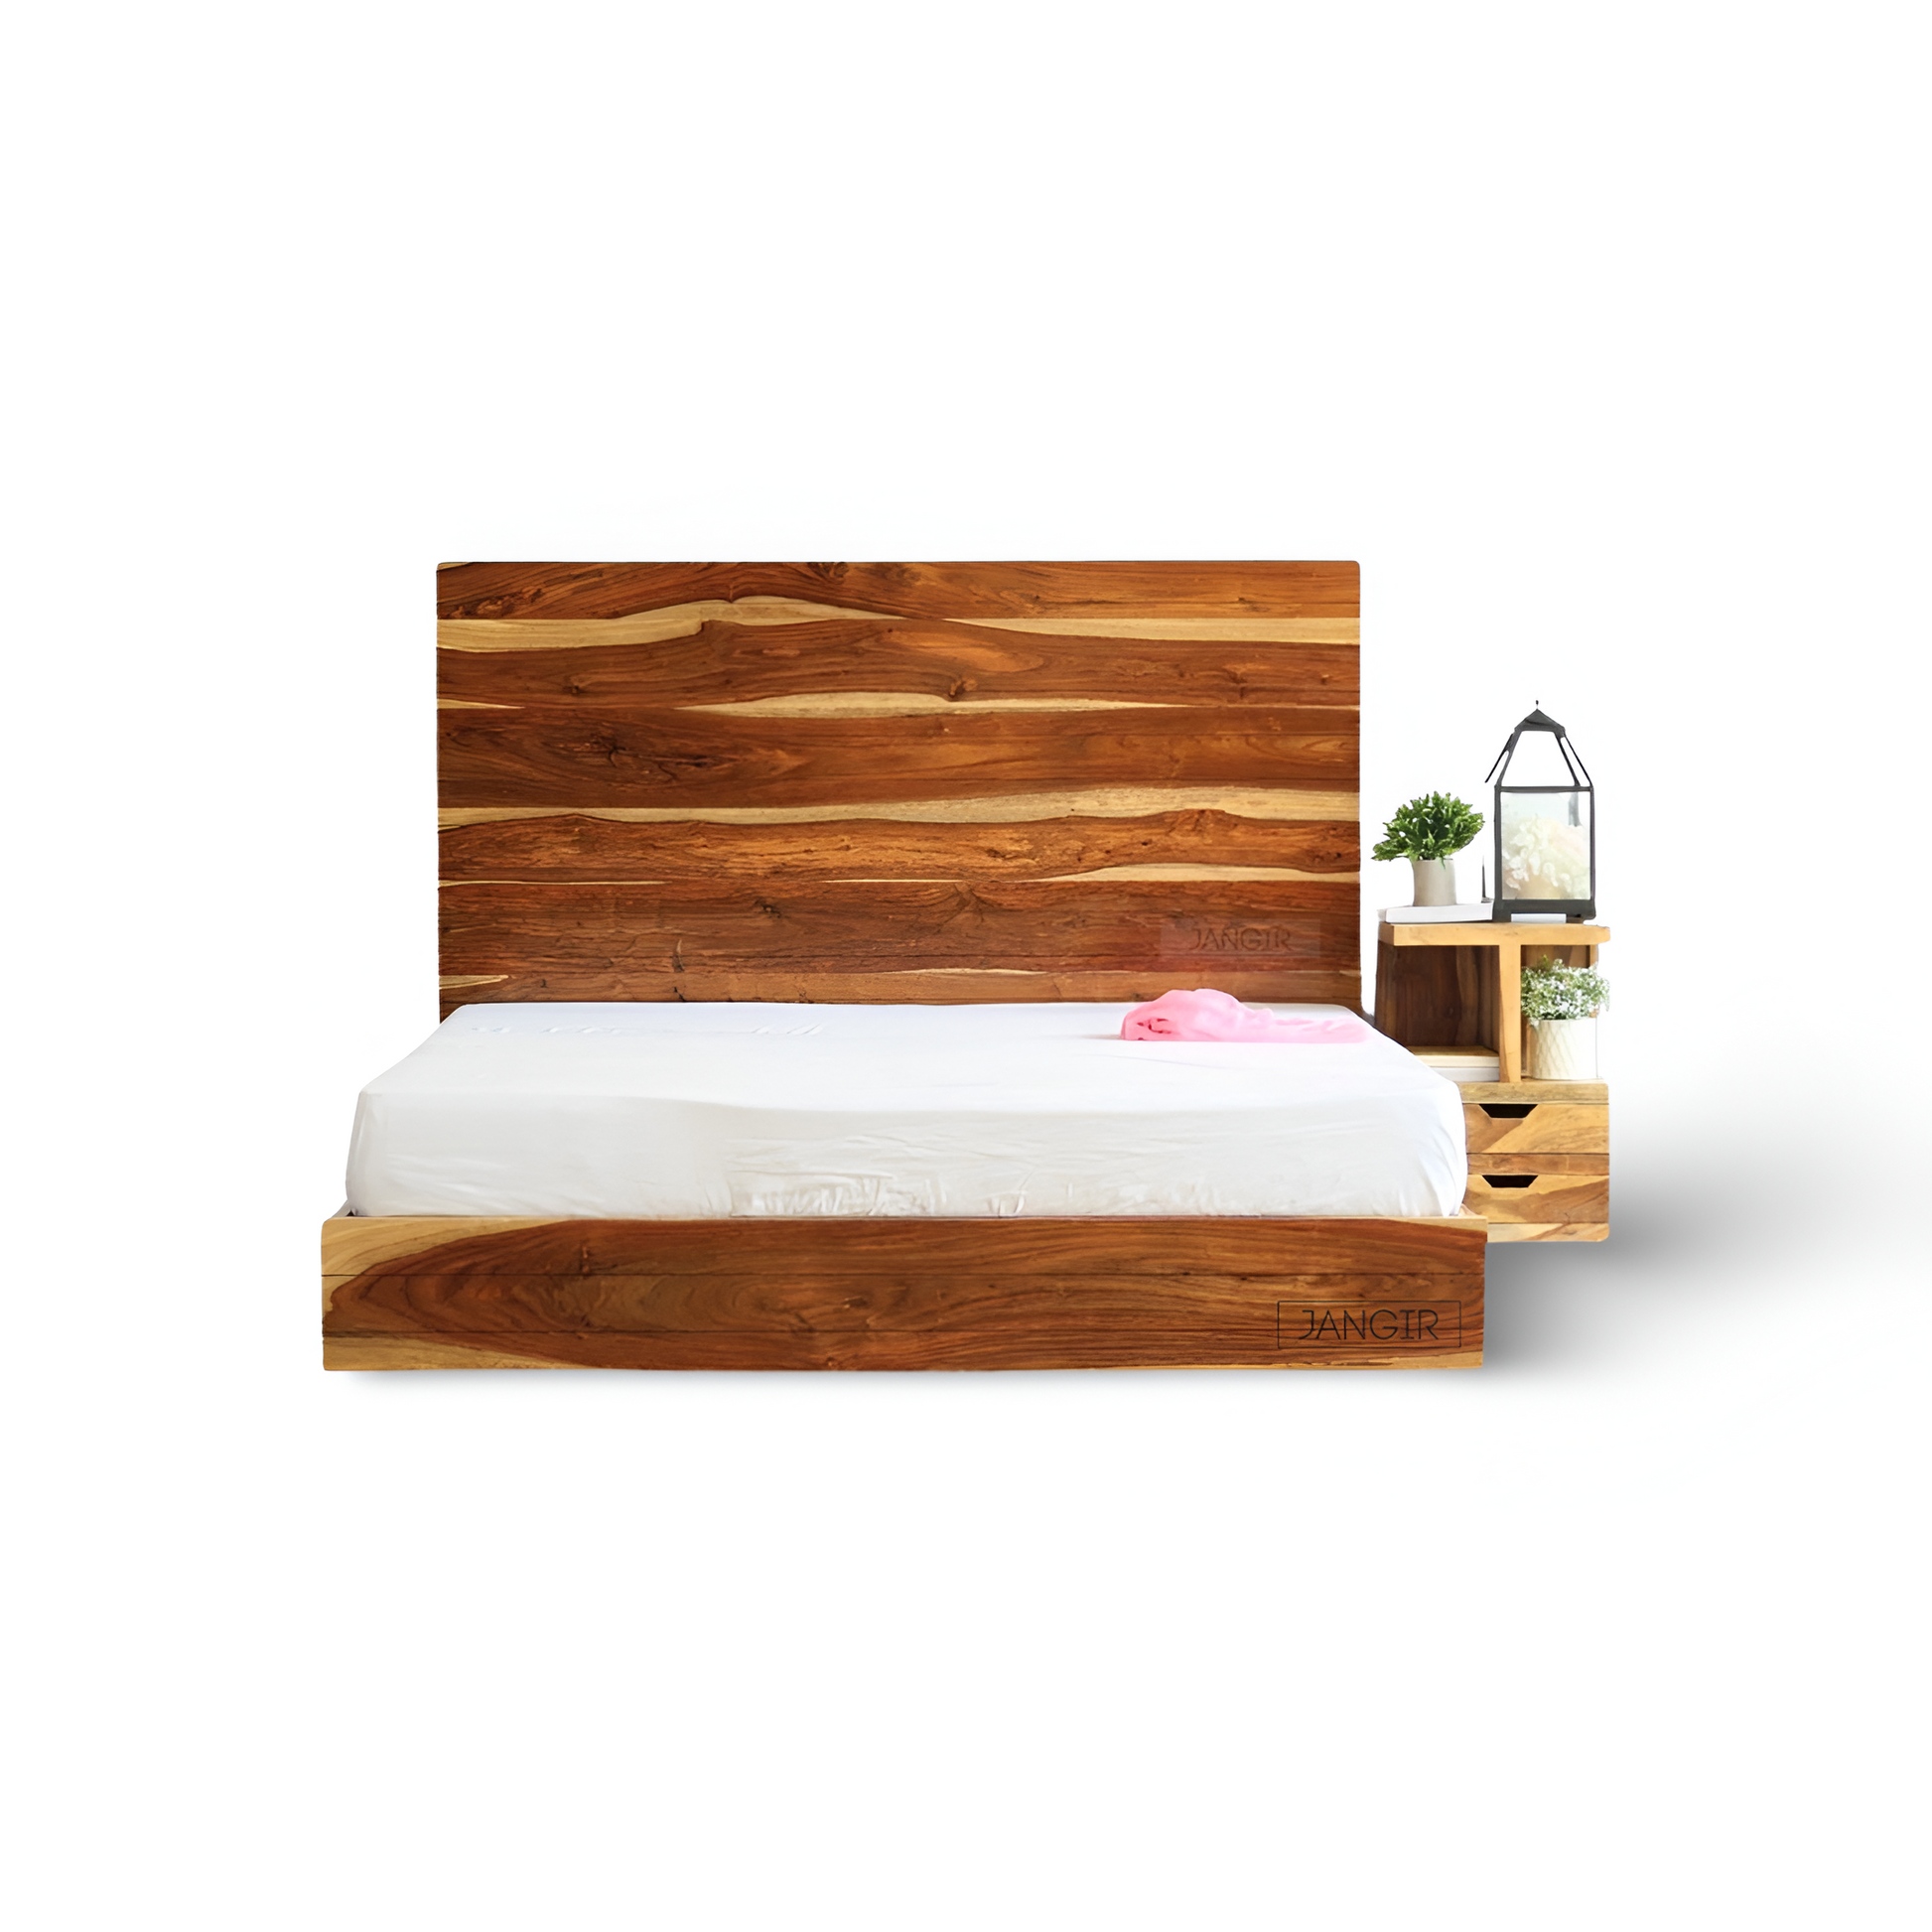 Discover elegance and comfort with the Seven Gru Solid Wood Bed, crafted from sheesham wood. The perfect addition to your bedroom, buy designer Low Wooden Bed in Bangalore